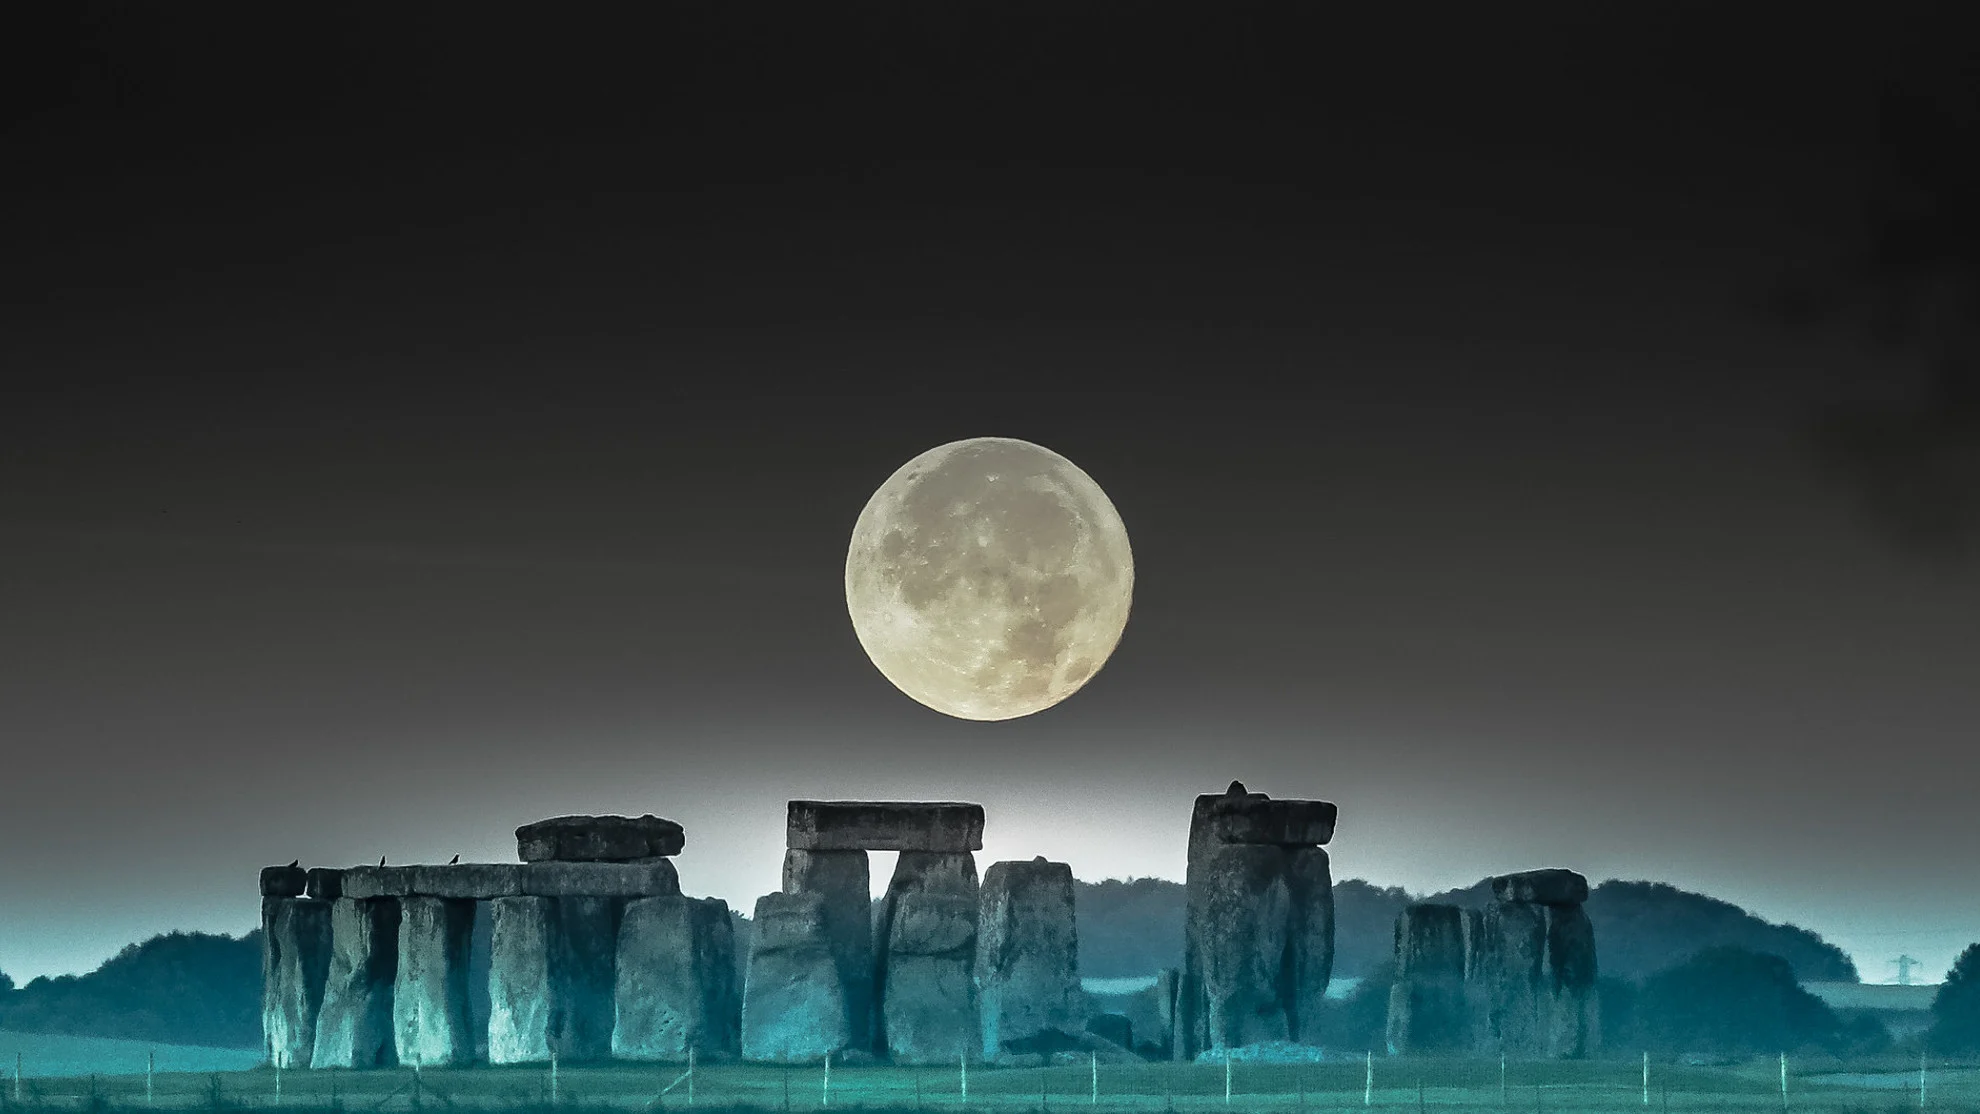 Harvest Moon over Stonehenge - Jeff Welch - CC BY 20